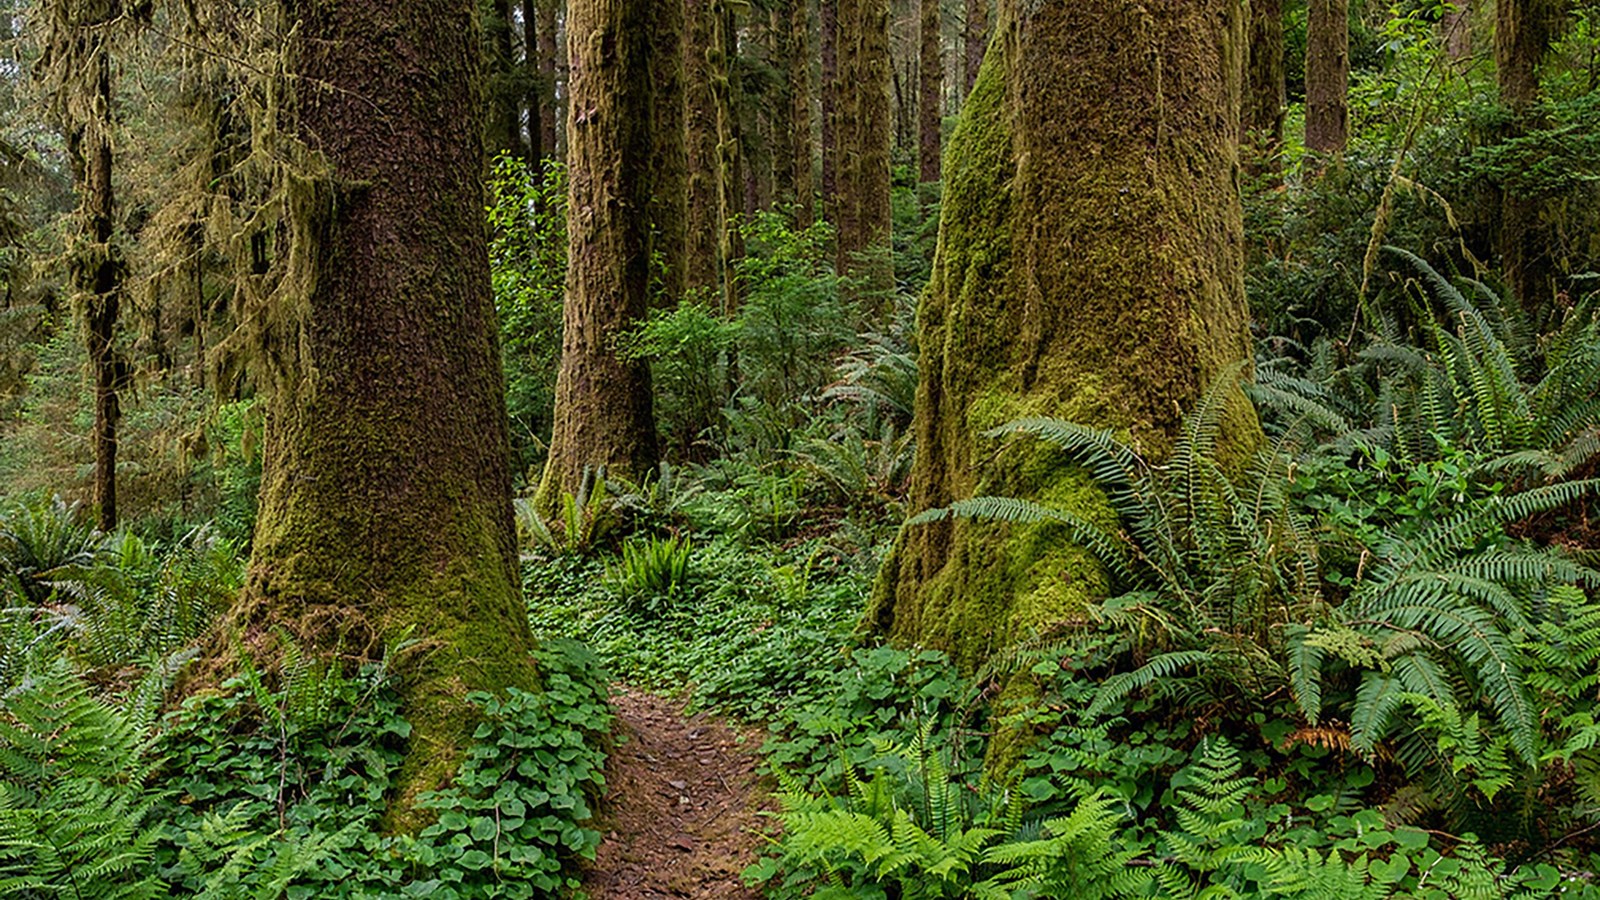 A trails passes under wide trees, while ferns and plants grow on the forest floor.